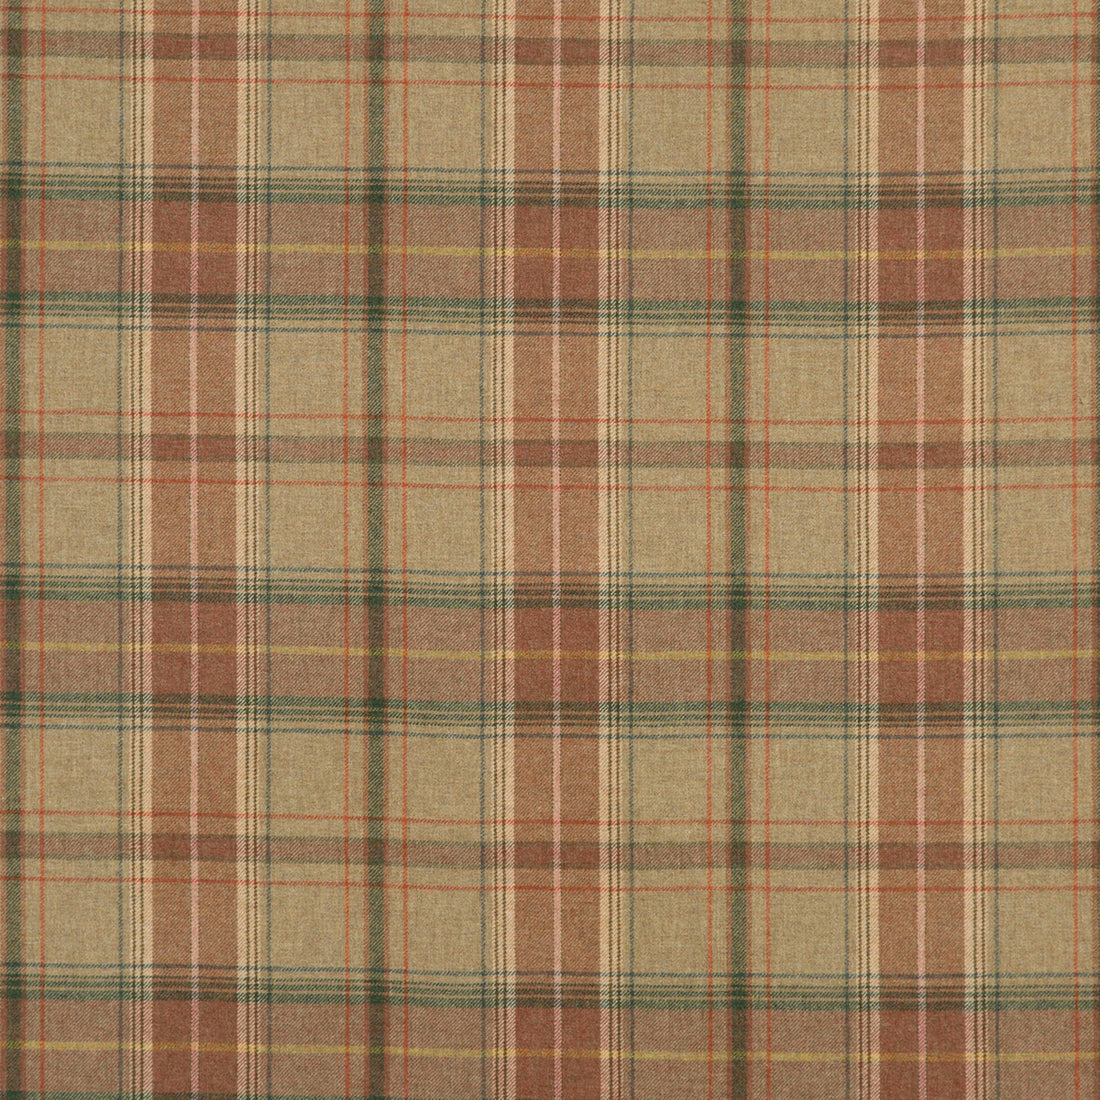 Shetland Plaid fabric in quartz color - pattern FD344.W122.0 - by Mulberry in the Bohemian Romance collection